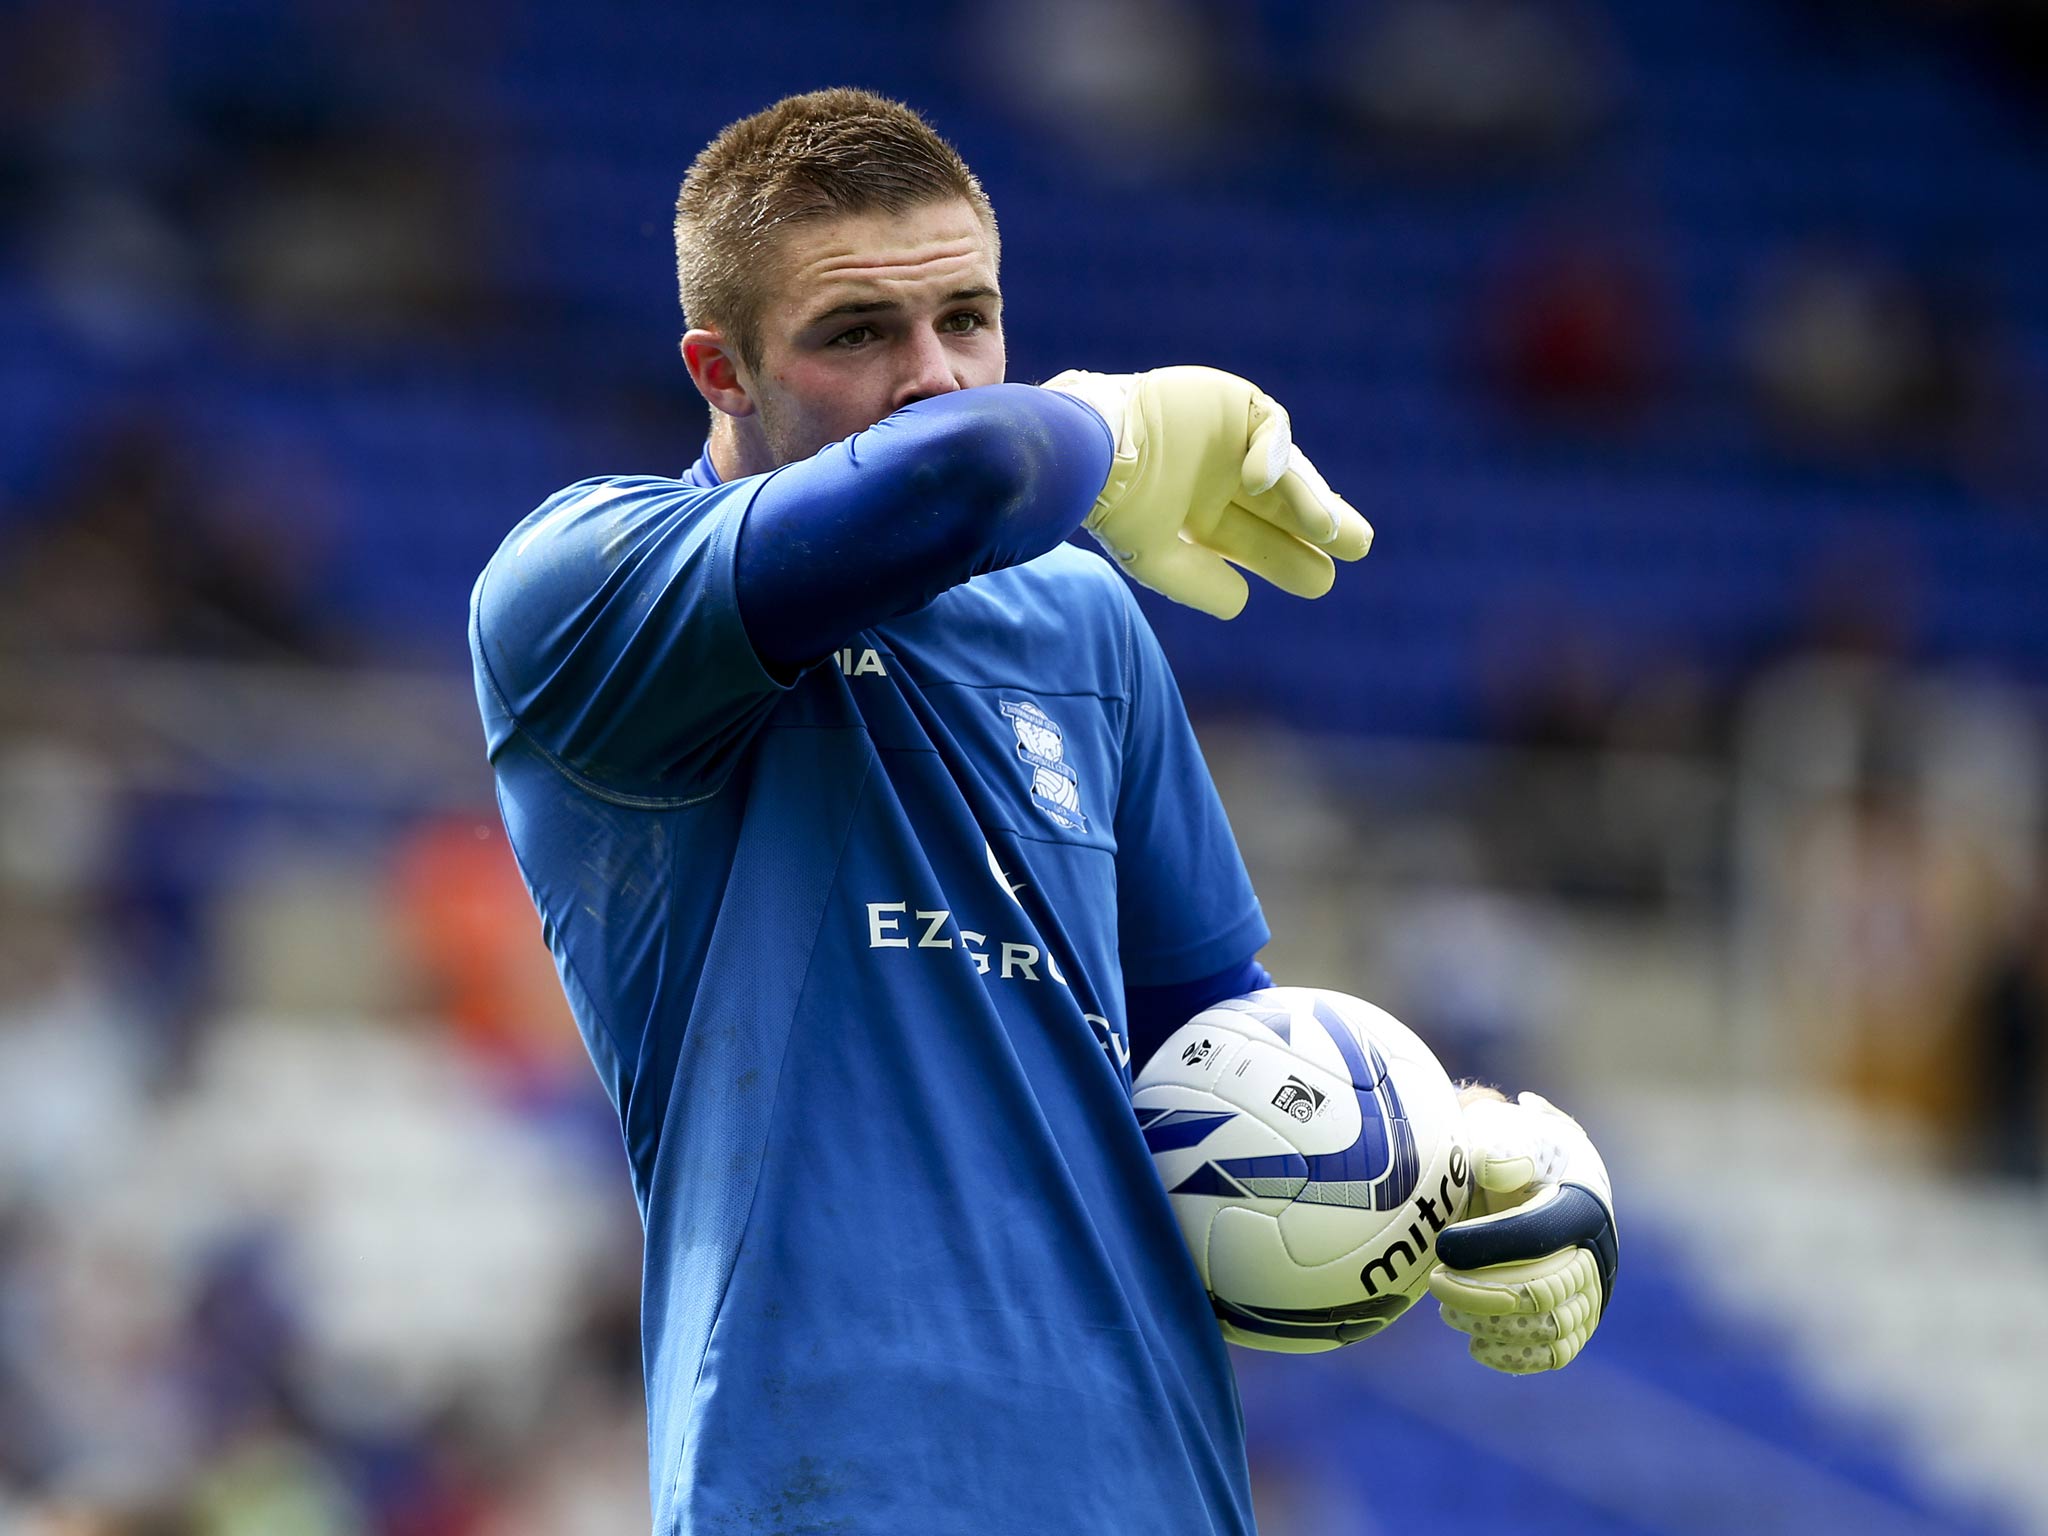 Jack Butland Cash-strapped Birmingham have said they will listen to offers for any of their players, including England international Jack Butland. Despite appearing for England Butland is still only 19-years-old, and may not have the neccessar